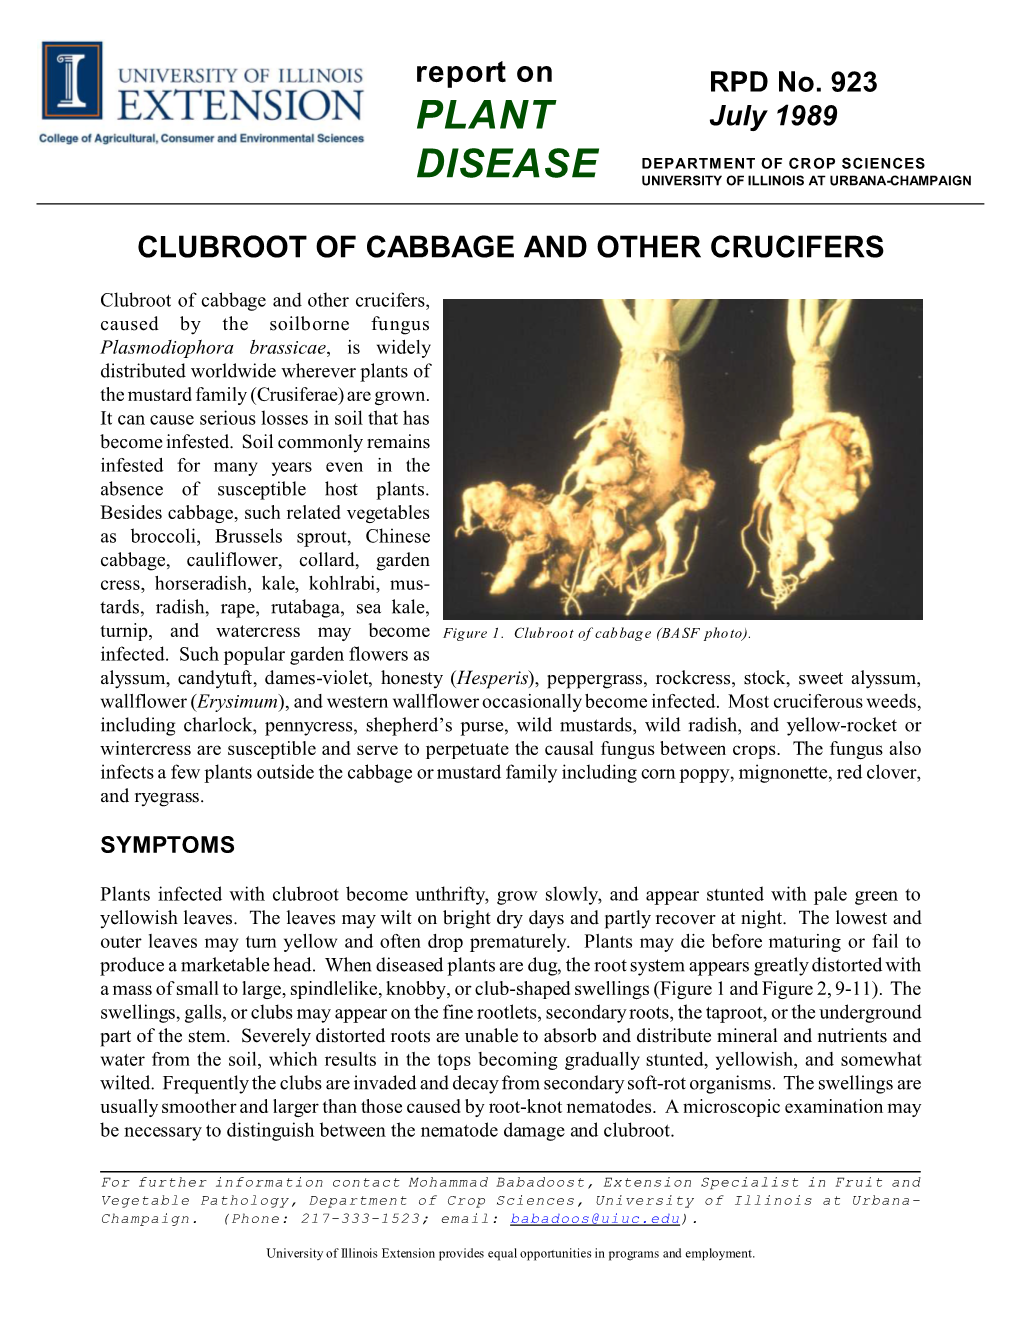 Clubroot of Cabbage and Other Crucifers